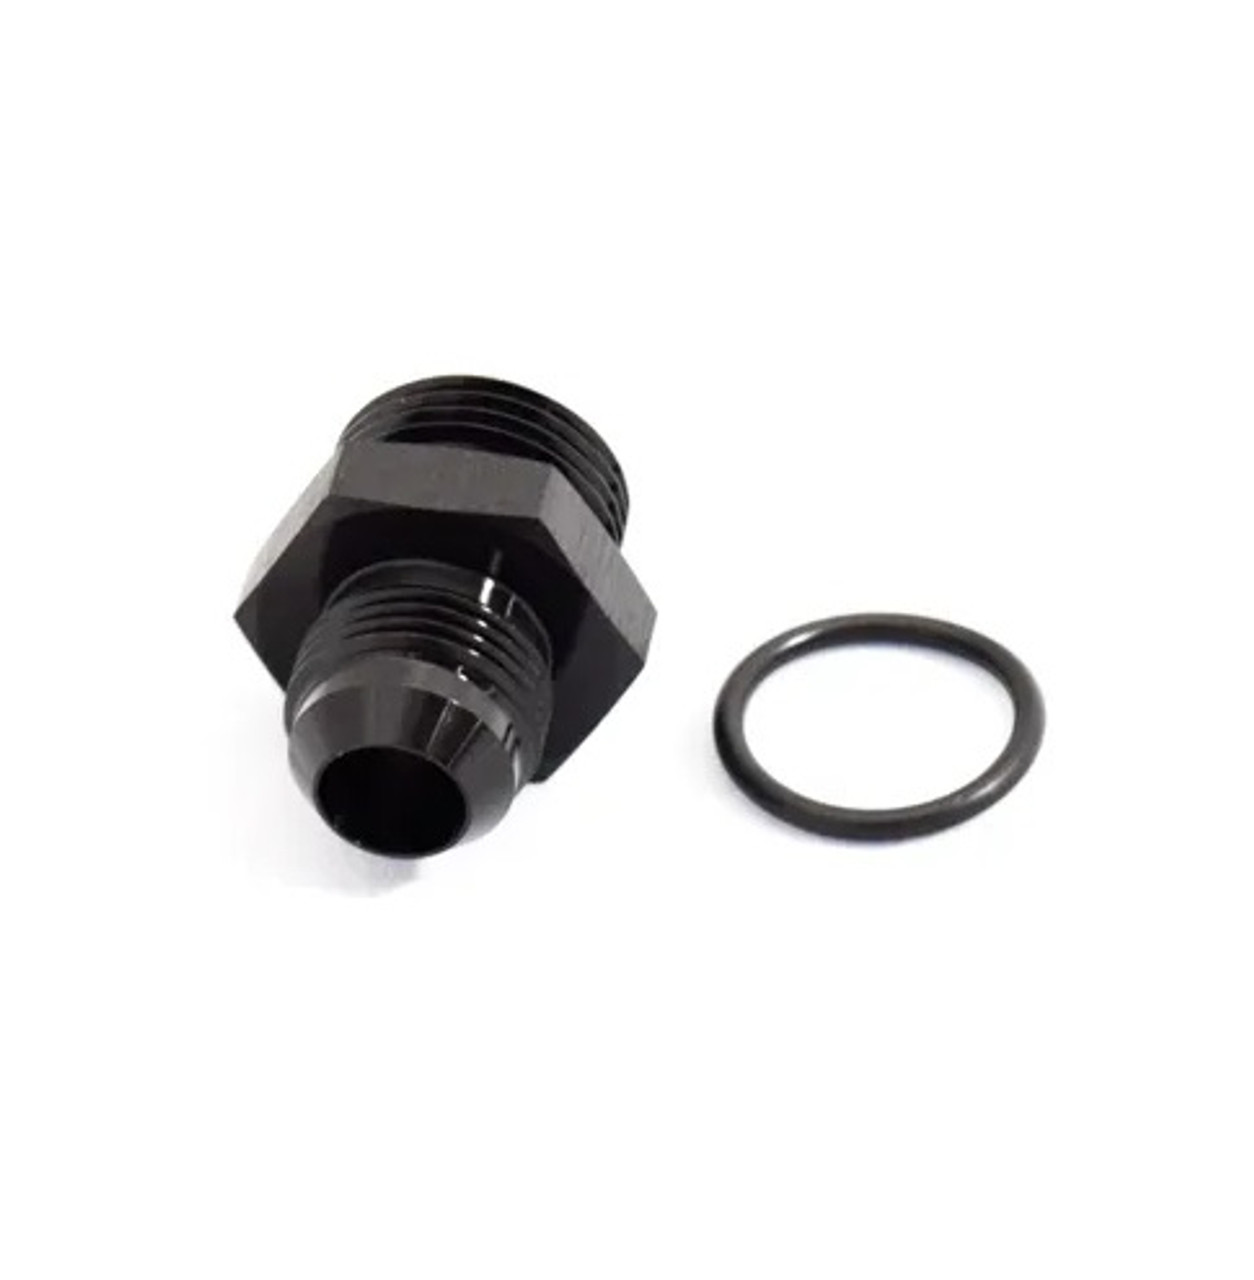 BTR 10AN Male to 12AN ORB O-ring Male Black Straight Adapter Fitting Brian Tooley